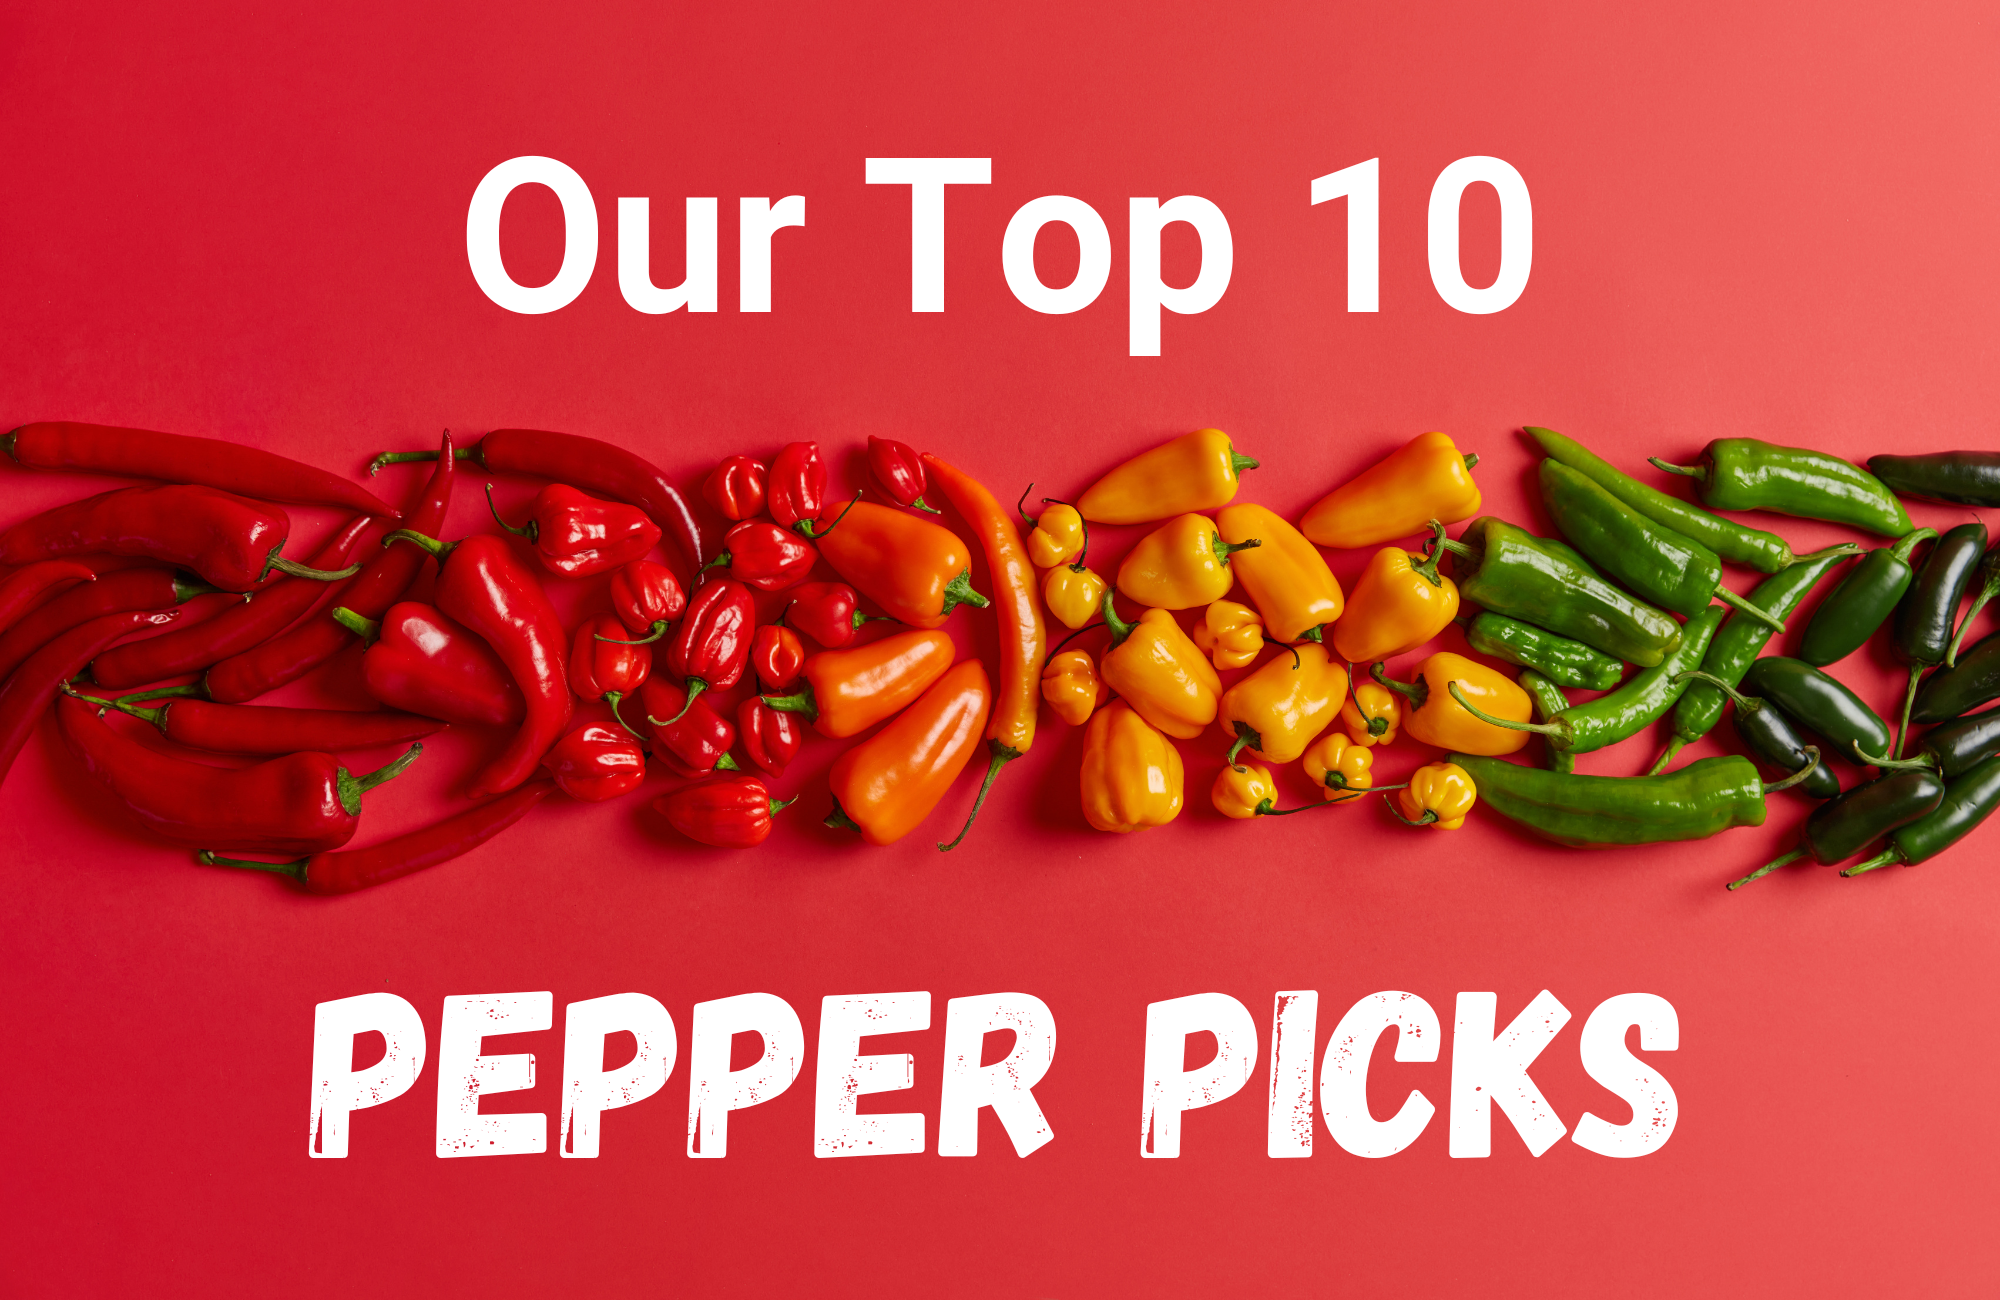 Colorful peppers on a red background with the text "Our Top 10 Pepper Picks"